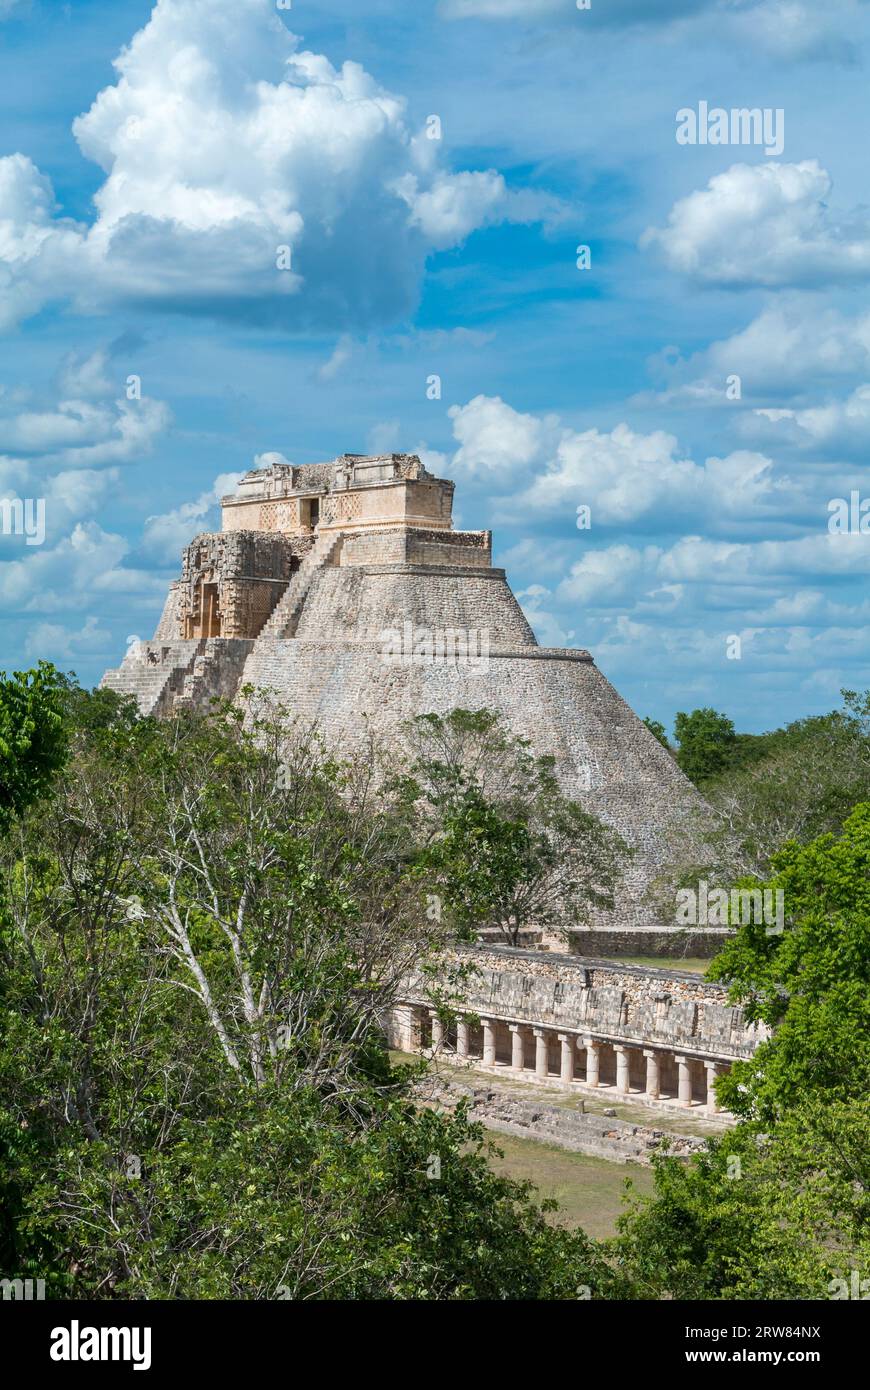 Uxmal, Yucatan, Mexico, The pyramid of Uxmal that is unesco world heritage in Yucatan peninsula.  Editorial only. Stock Photo